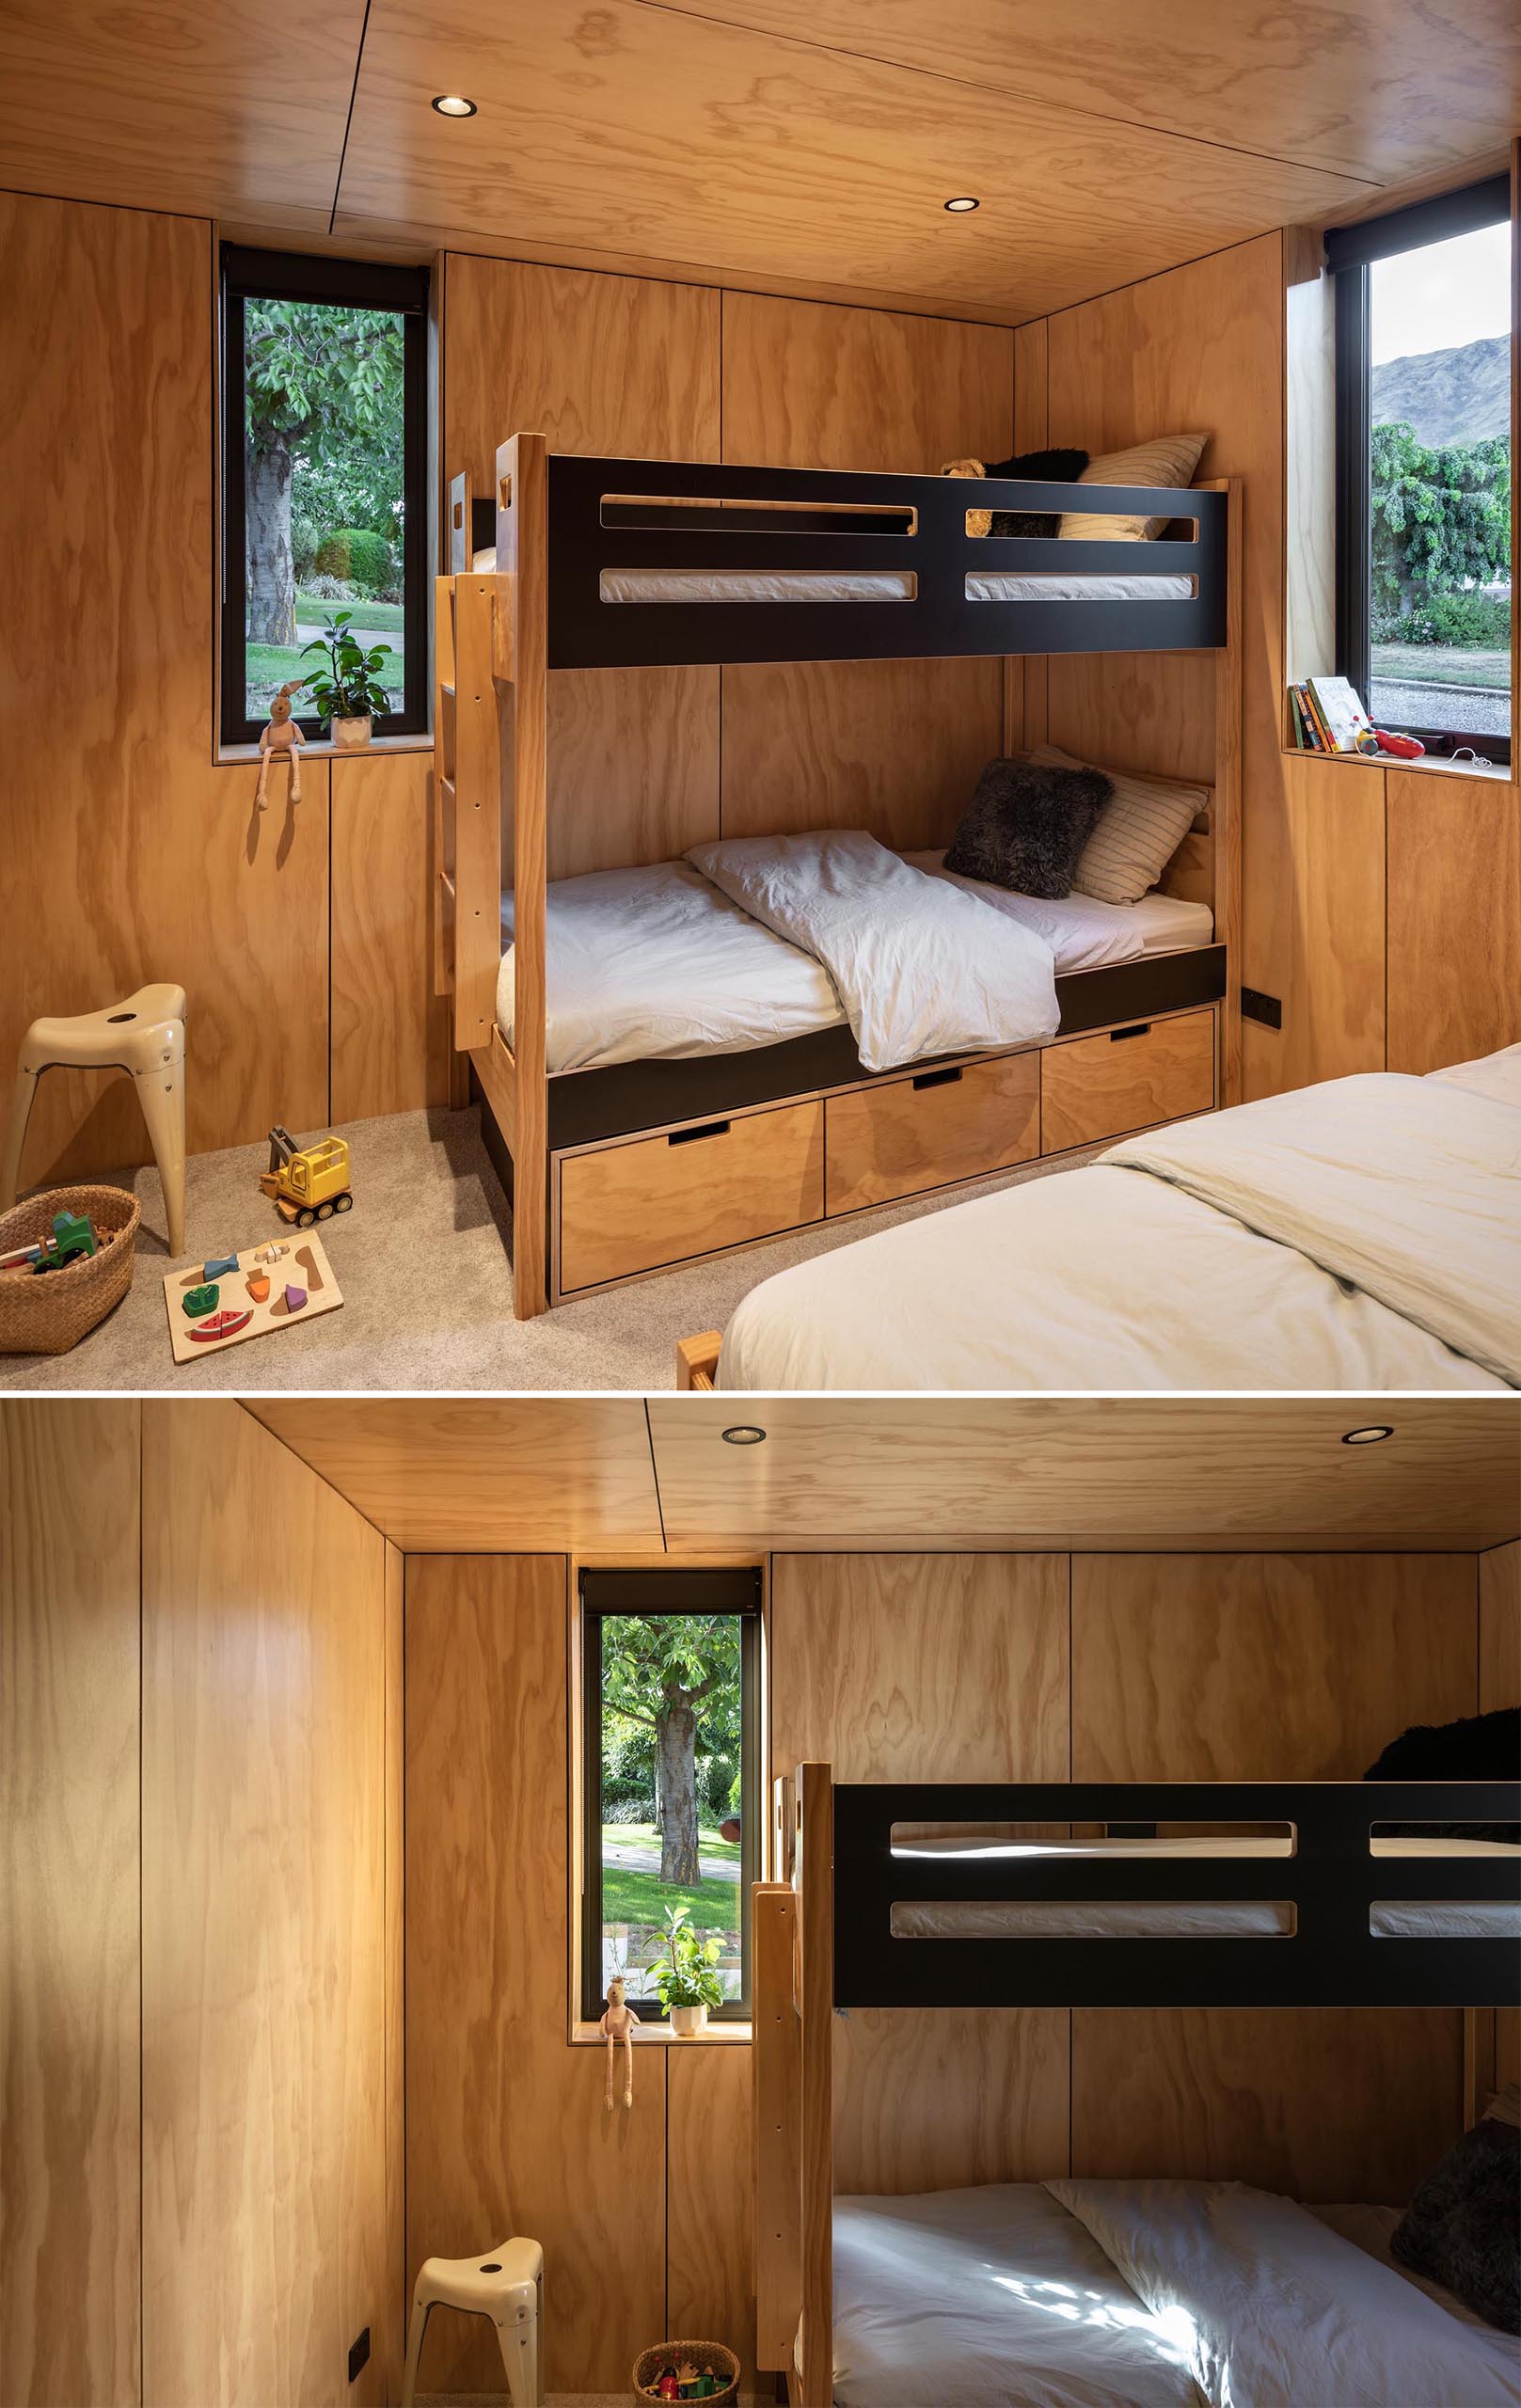 A modern kids bedroom with wood walls and ceiling, and a bunk bed.